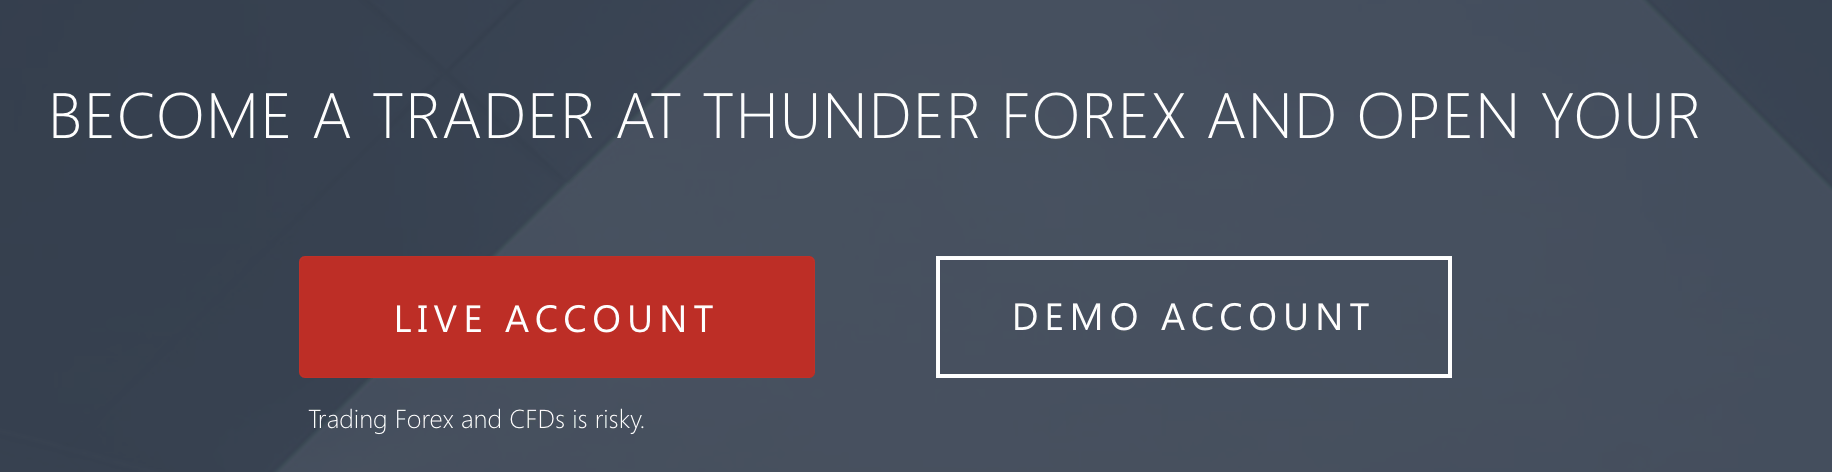 Possibility to practice trading with a demo account with thunder forex